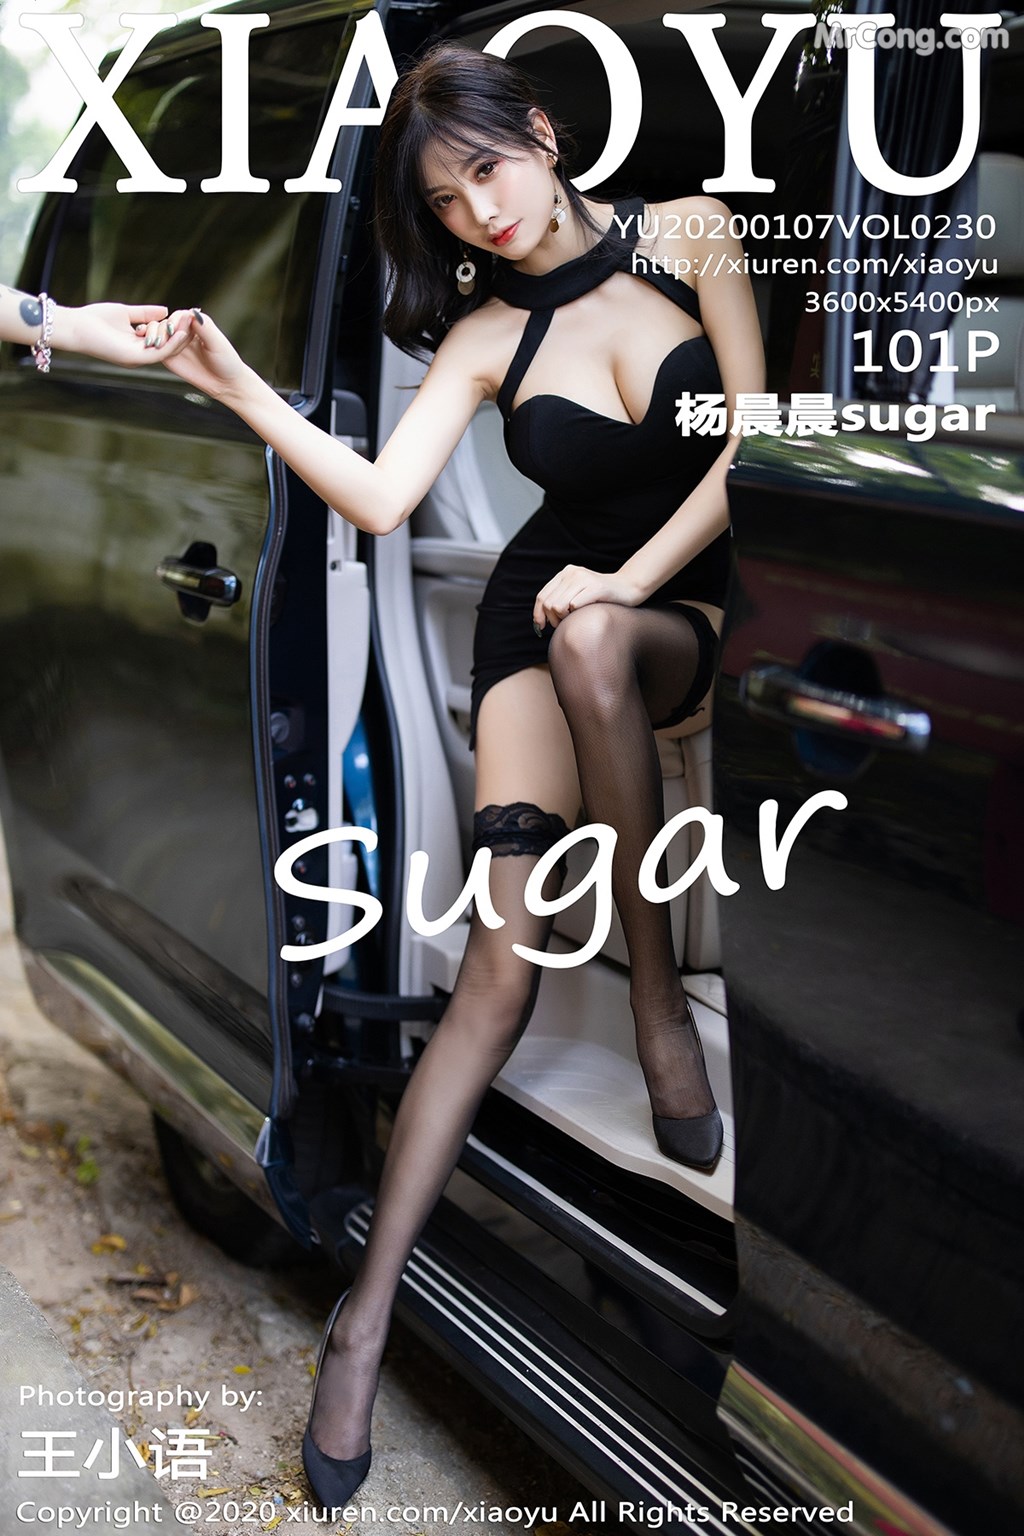 XiaoYu Vol. 230: Yang Chen Chen (杨晨晨 sugar) (102 pictures)